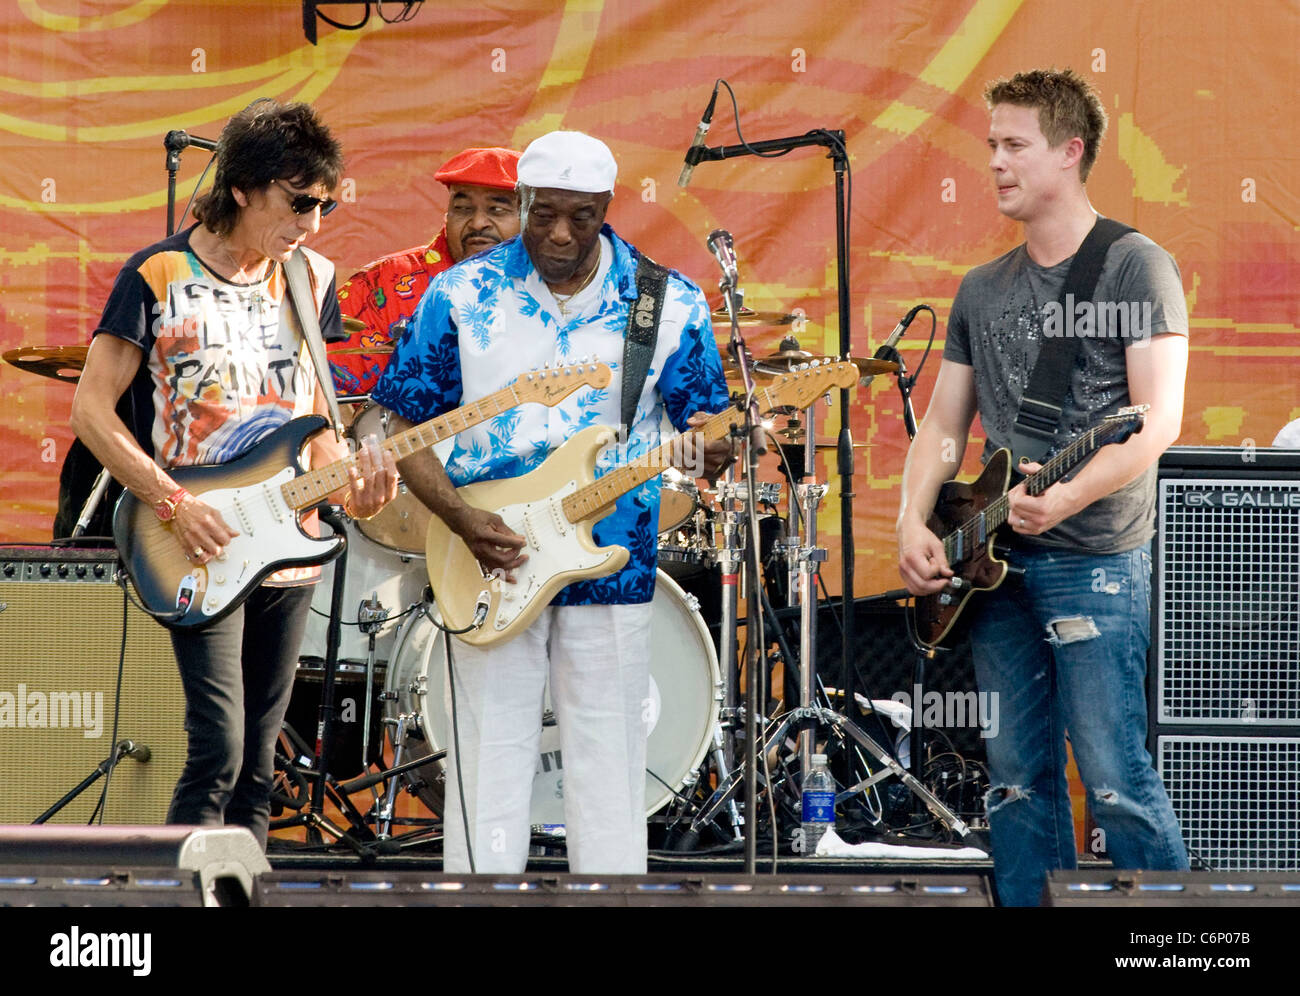 Ronnie Wood, Buddy Guy and Johnny Lang Crossroads Guitar Festival 2010 at  Toyota Park llinois, Chicago, USA - 26.06.10 Stock Photo - Alamy